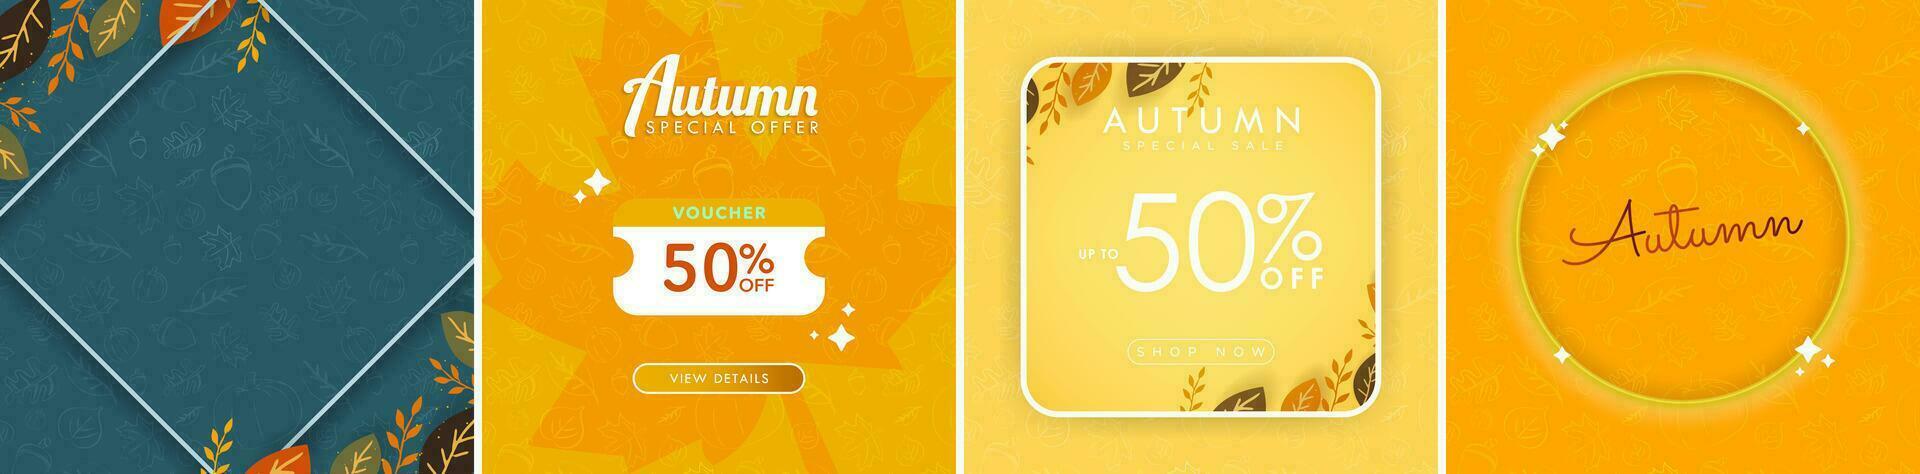 Set of Modern and trendy Autumn-themed backdrops and card backgrounds, up to 50 off Autumn special sale. Editable Vector Art.